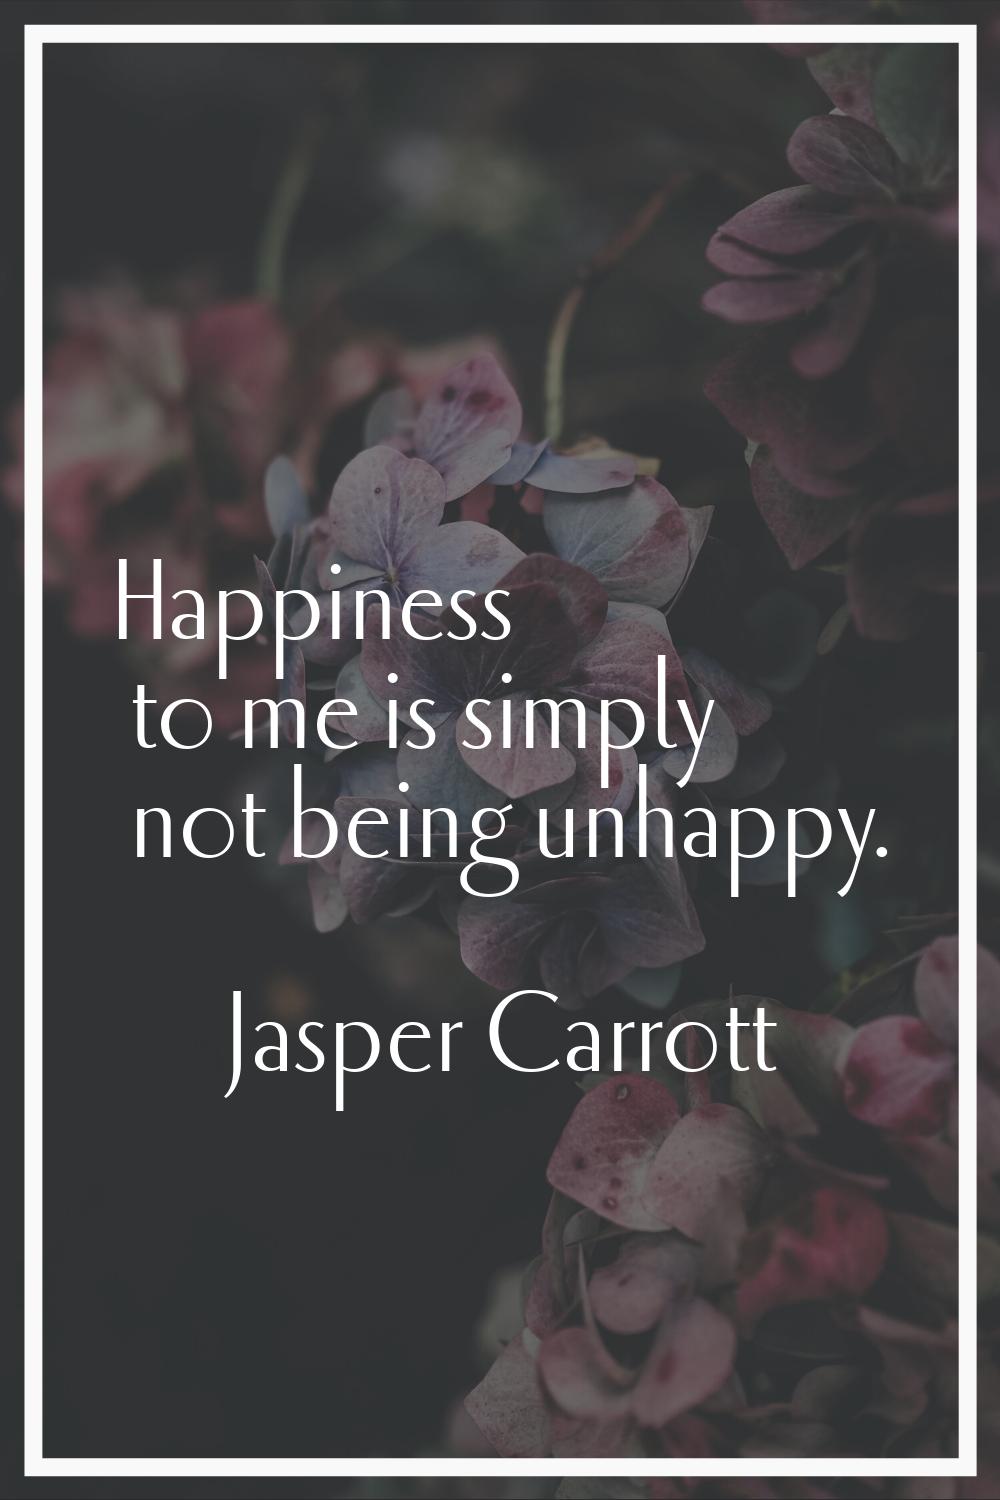 Happiness to me is simply not being unhappy.